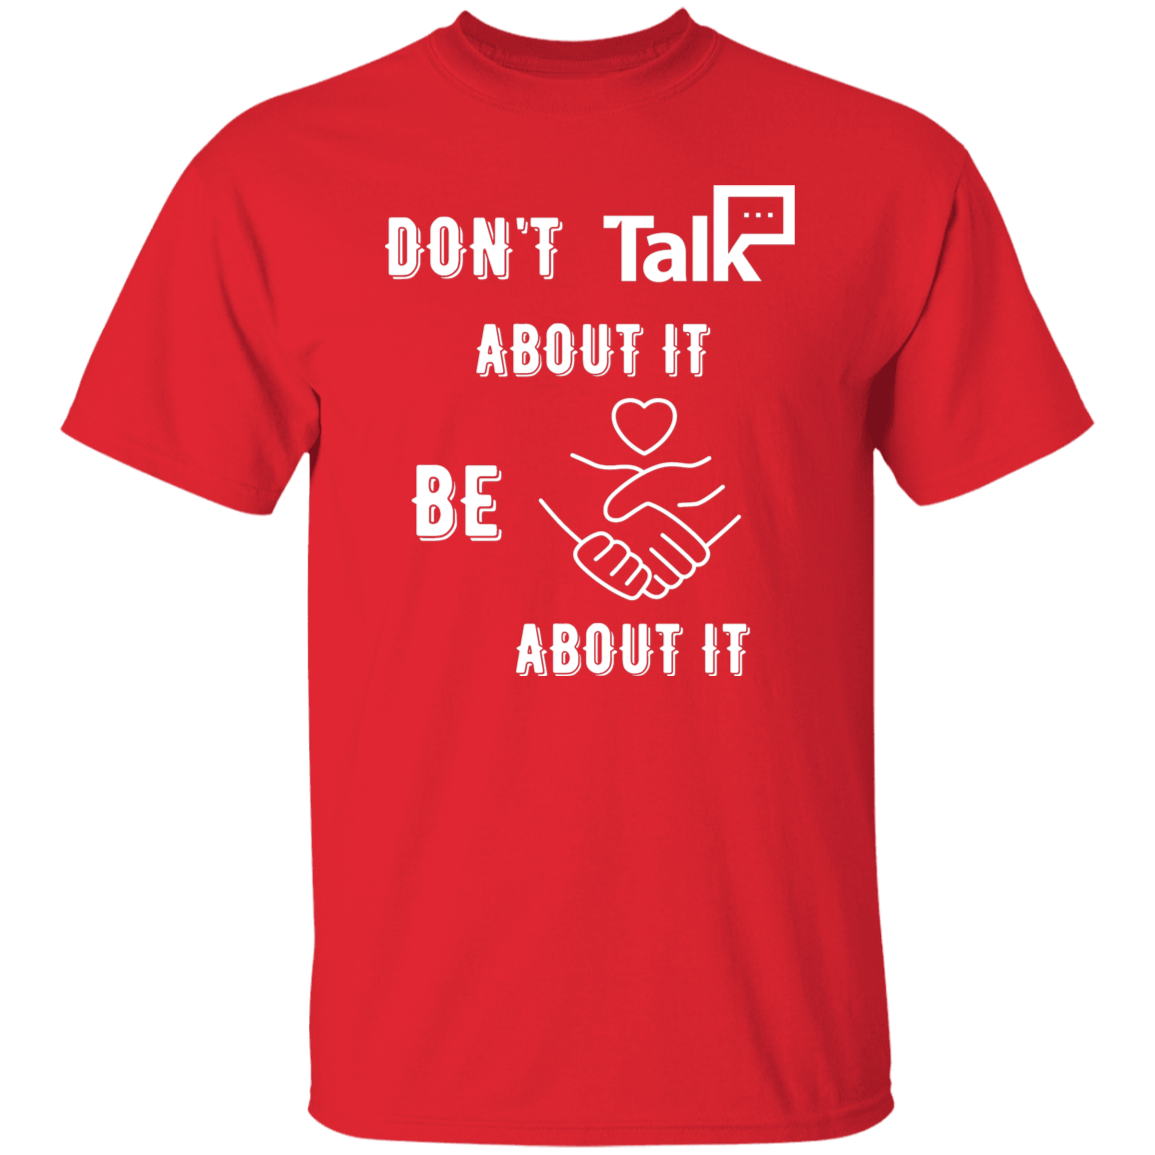 Don't Talk About It - Equality Short Sleeve Shirt